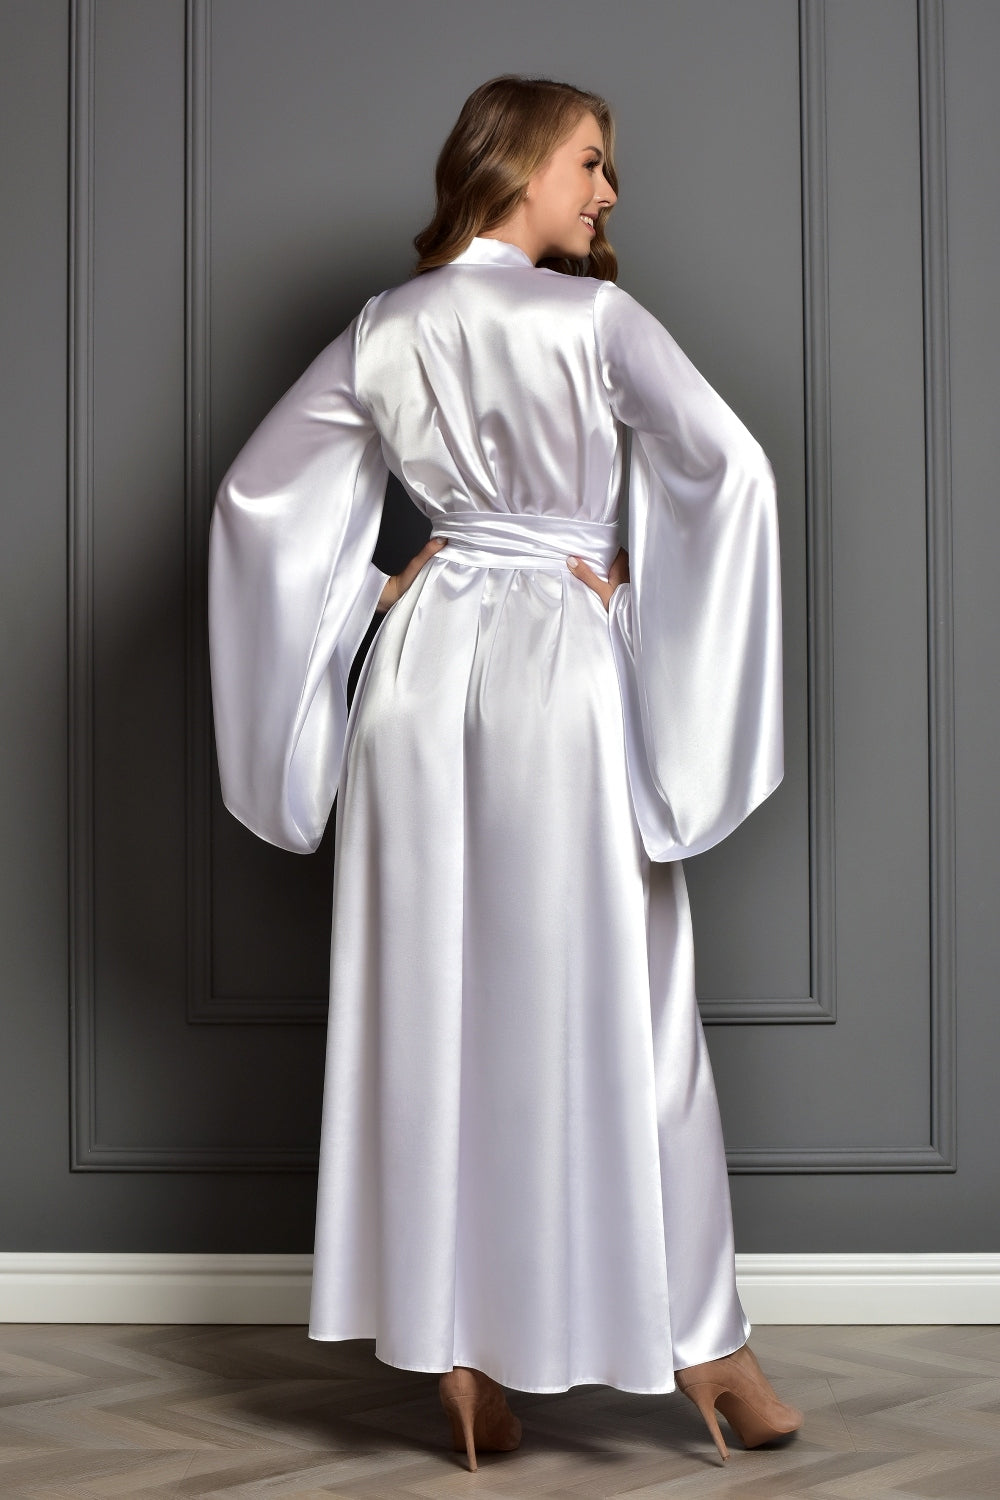 Matching Robe for Bridal Peignoir Set - Pure sophistication